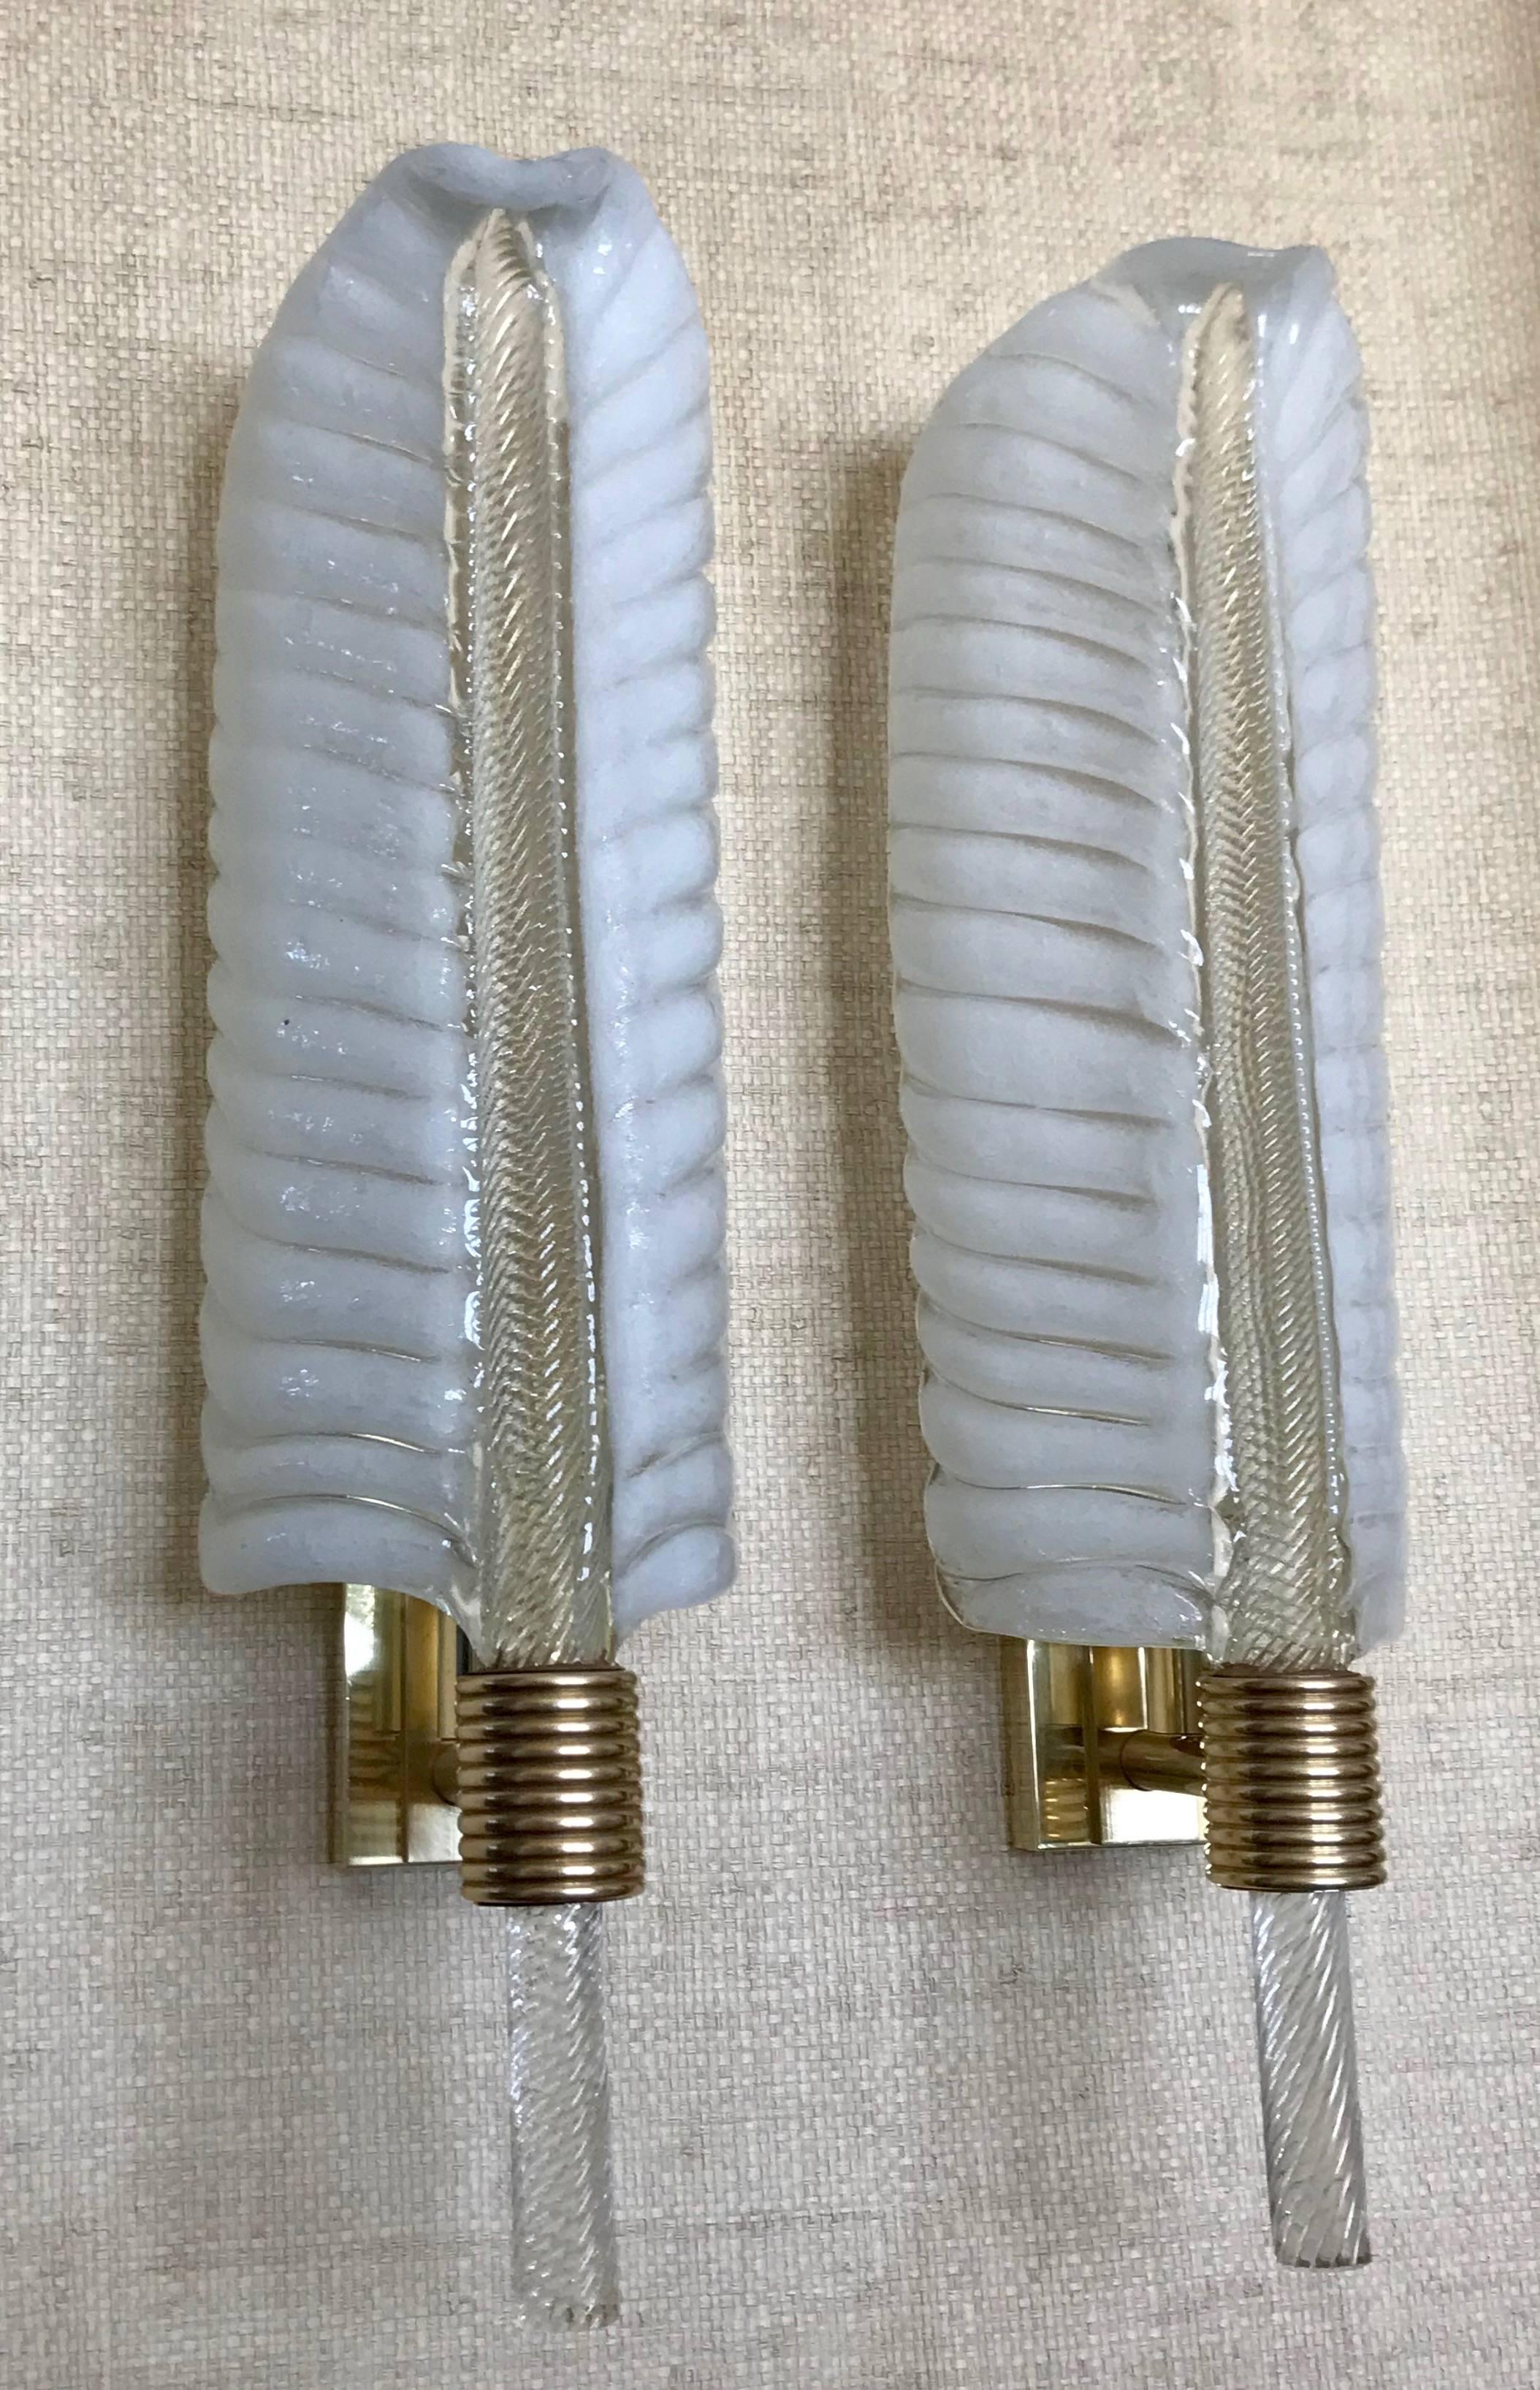 A larger scale pair of Murano glass wall sconces in plume or feather form by Barovier & Toso, Italy. Clear twisted glass stems with gold inclusions with opaque wings in the puleguso (infused with tiny bubbles). Original brass fittings have been